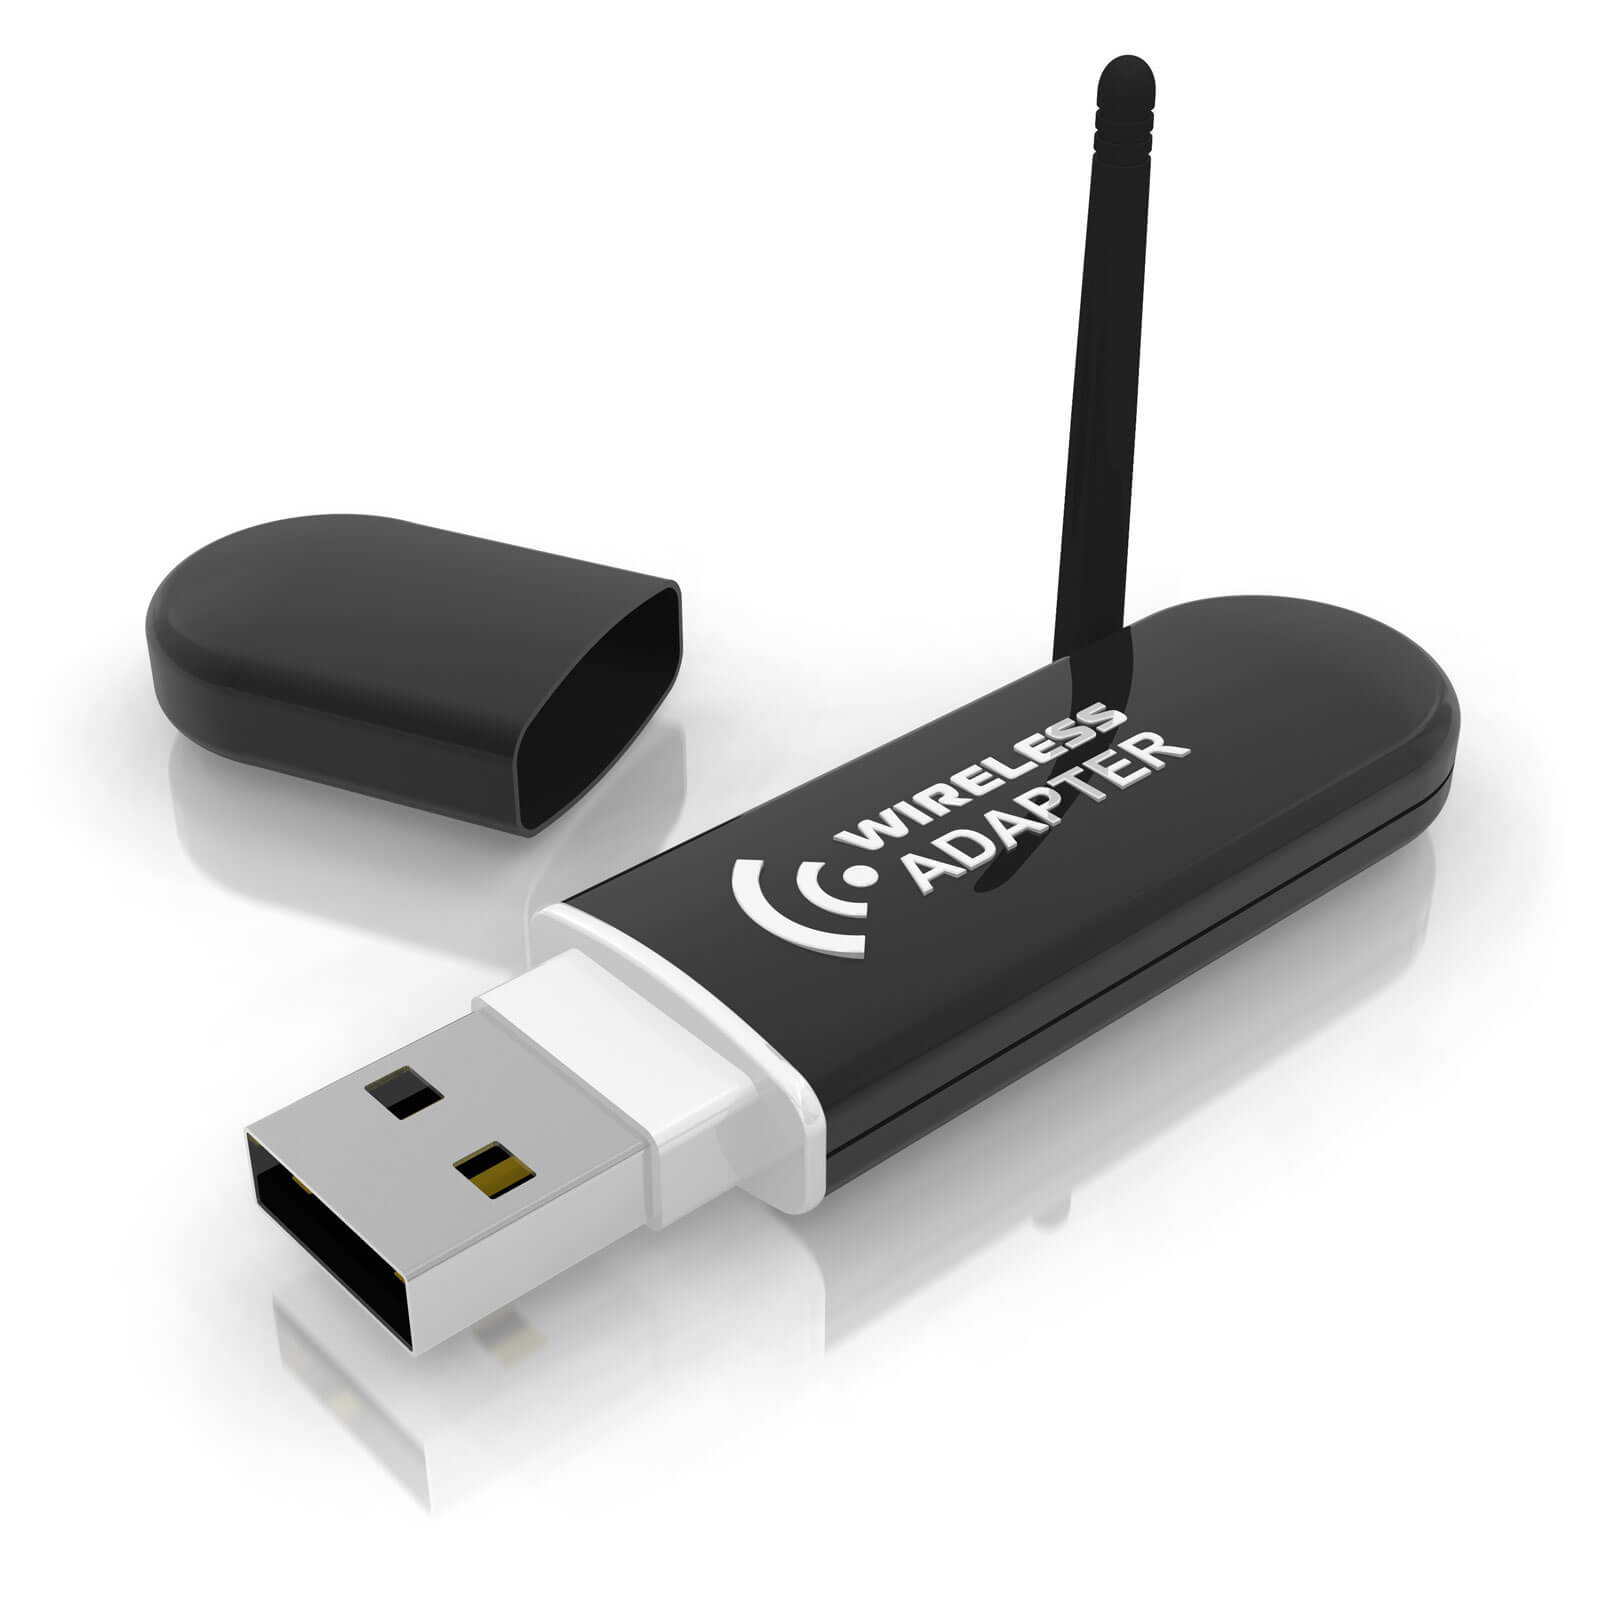 dongle for internet